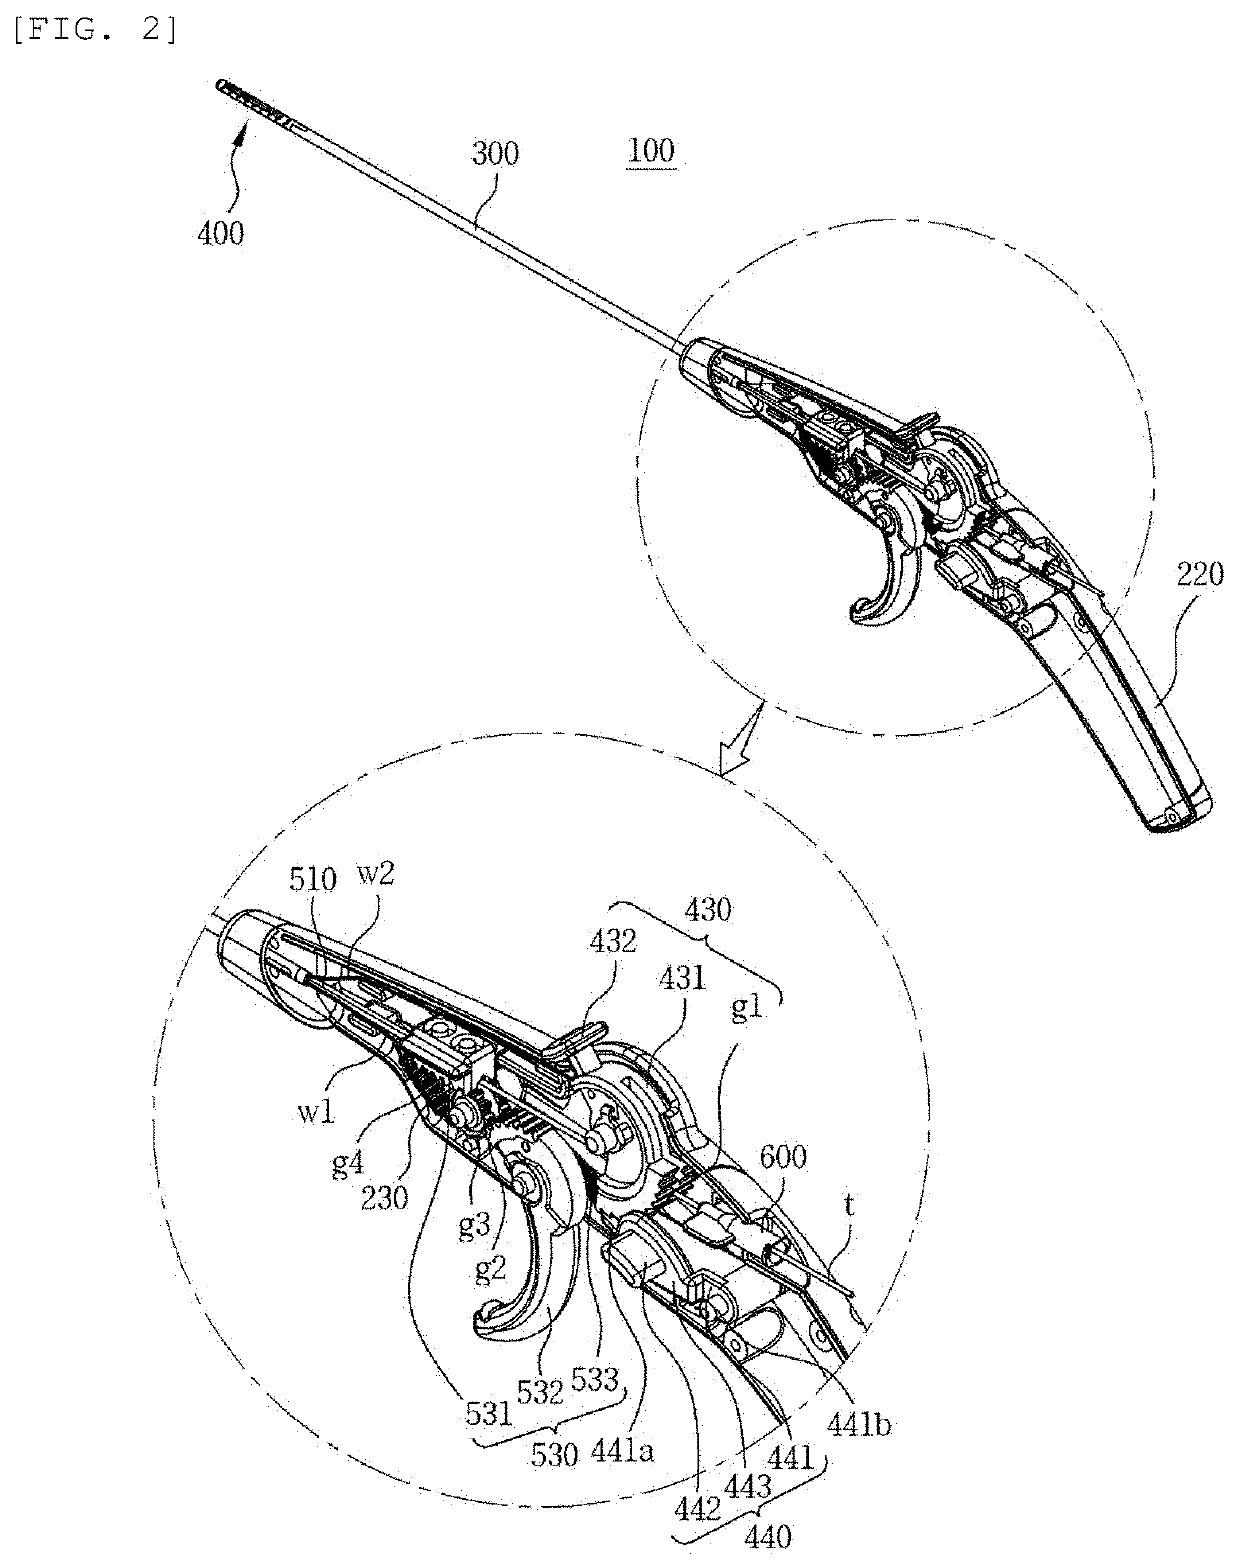 Tissue removal device